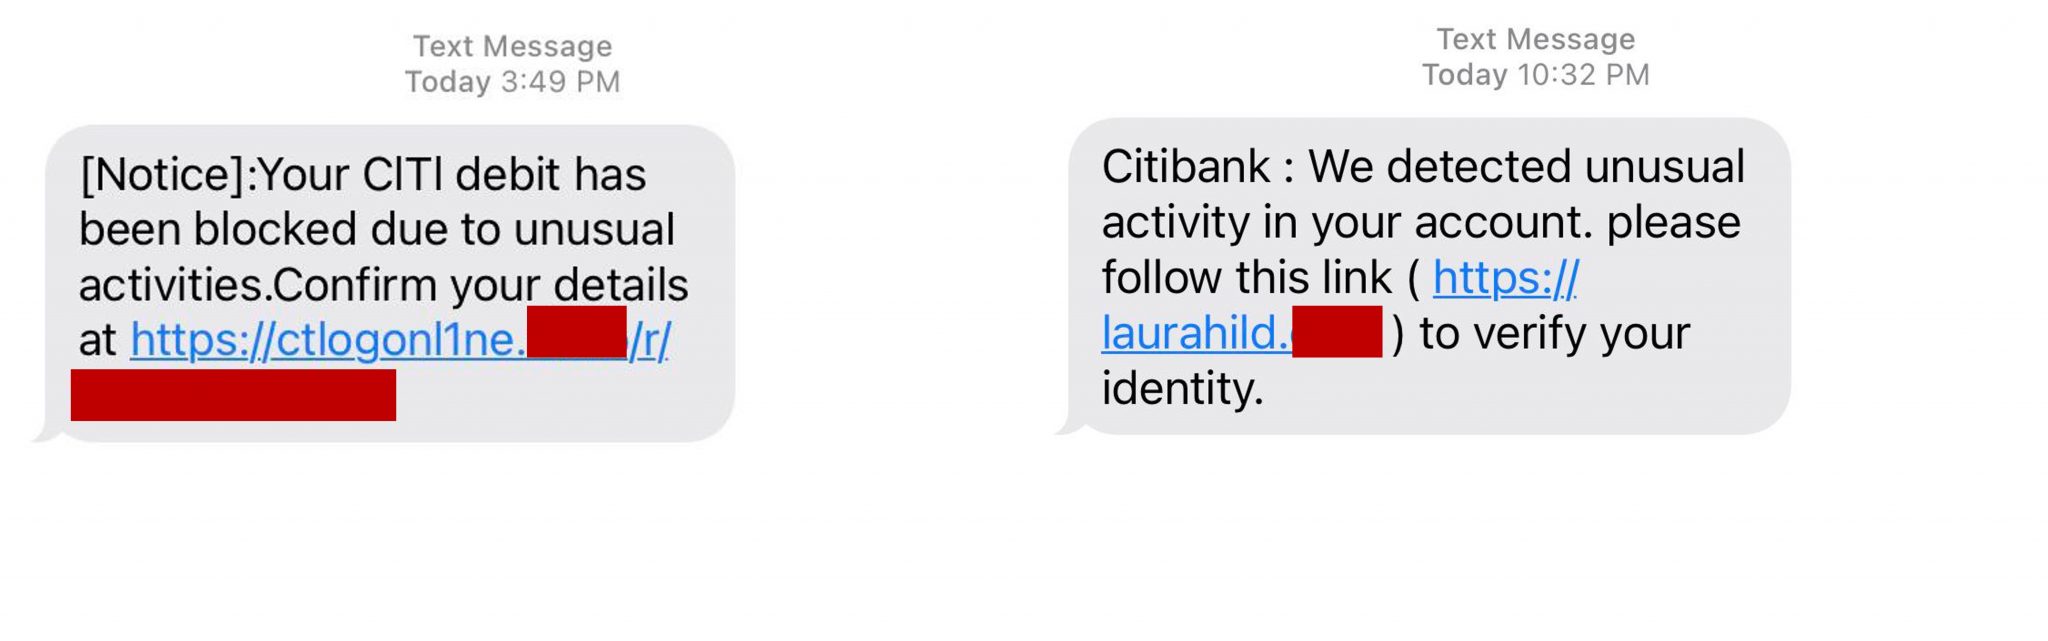 Citibank, Wells Fargo, Chase… Watch Out for Fake Bank Text Messages